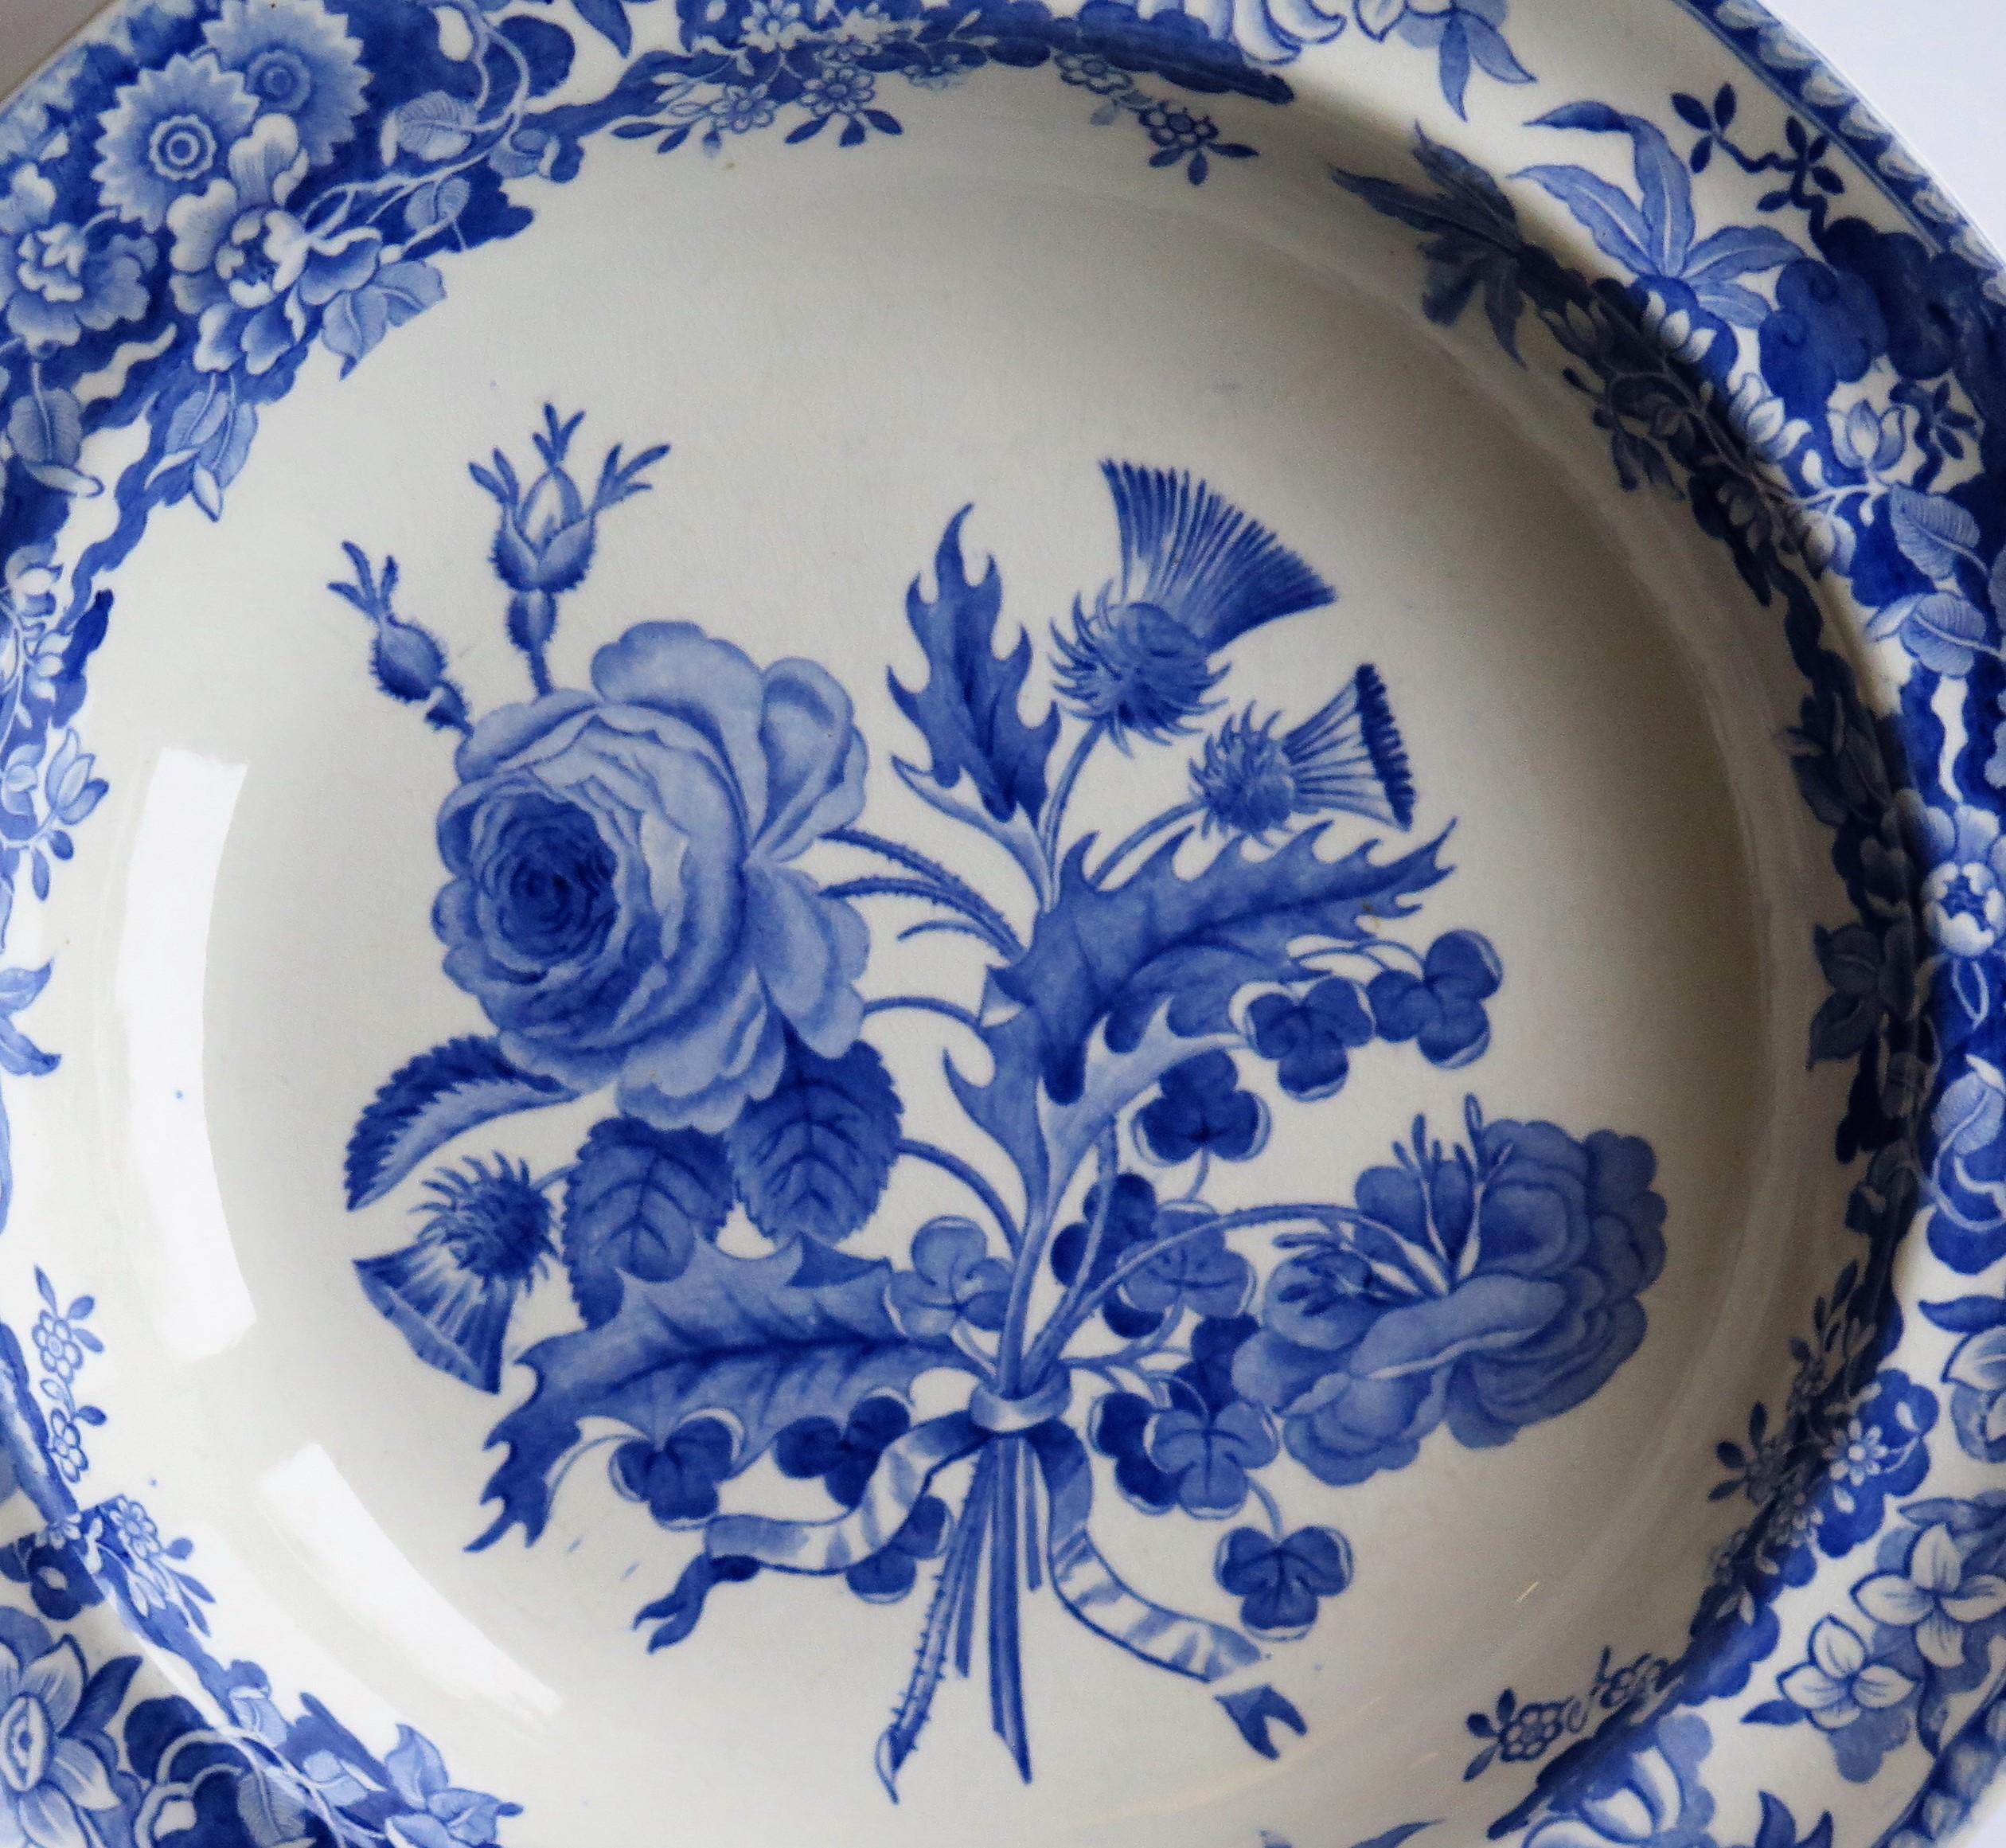 Pearlware Georgian Plate or Bowl by Spode in Blue and White Union Wreath Ptn No.3, Ca 1820